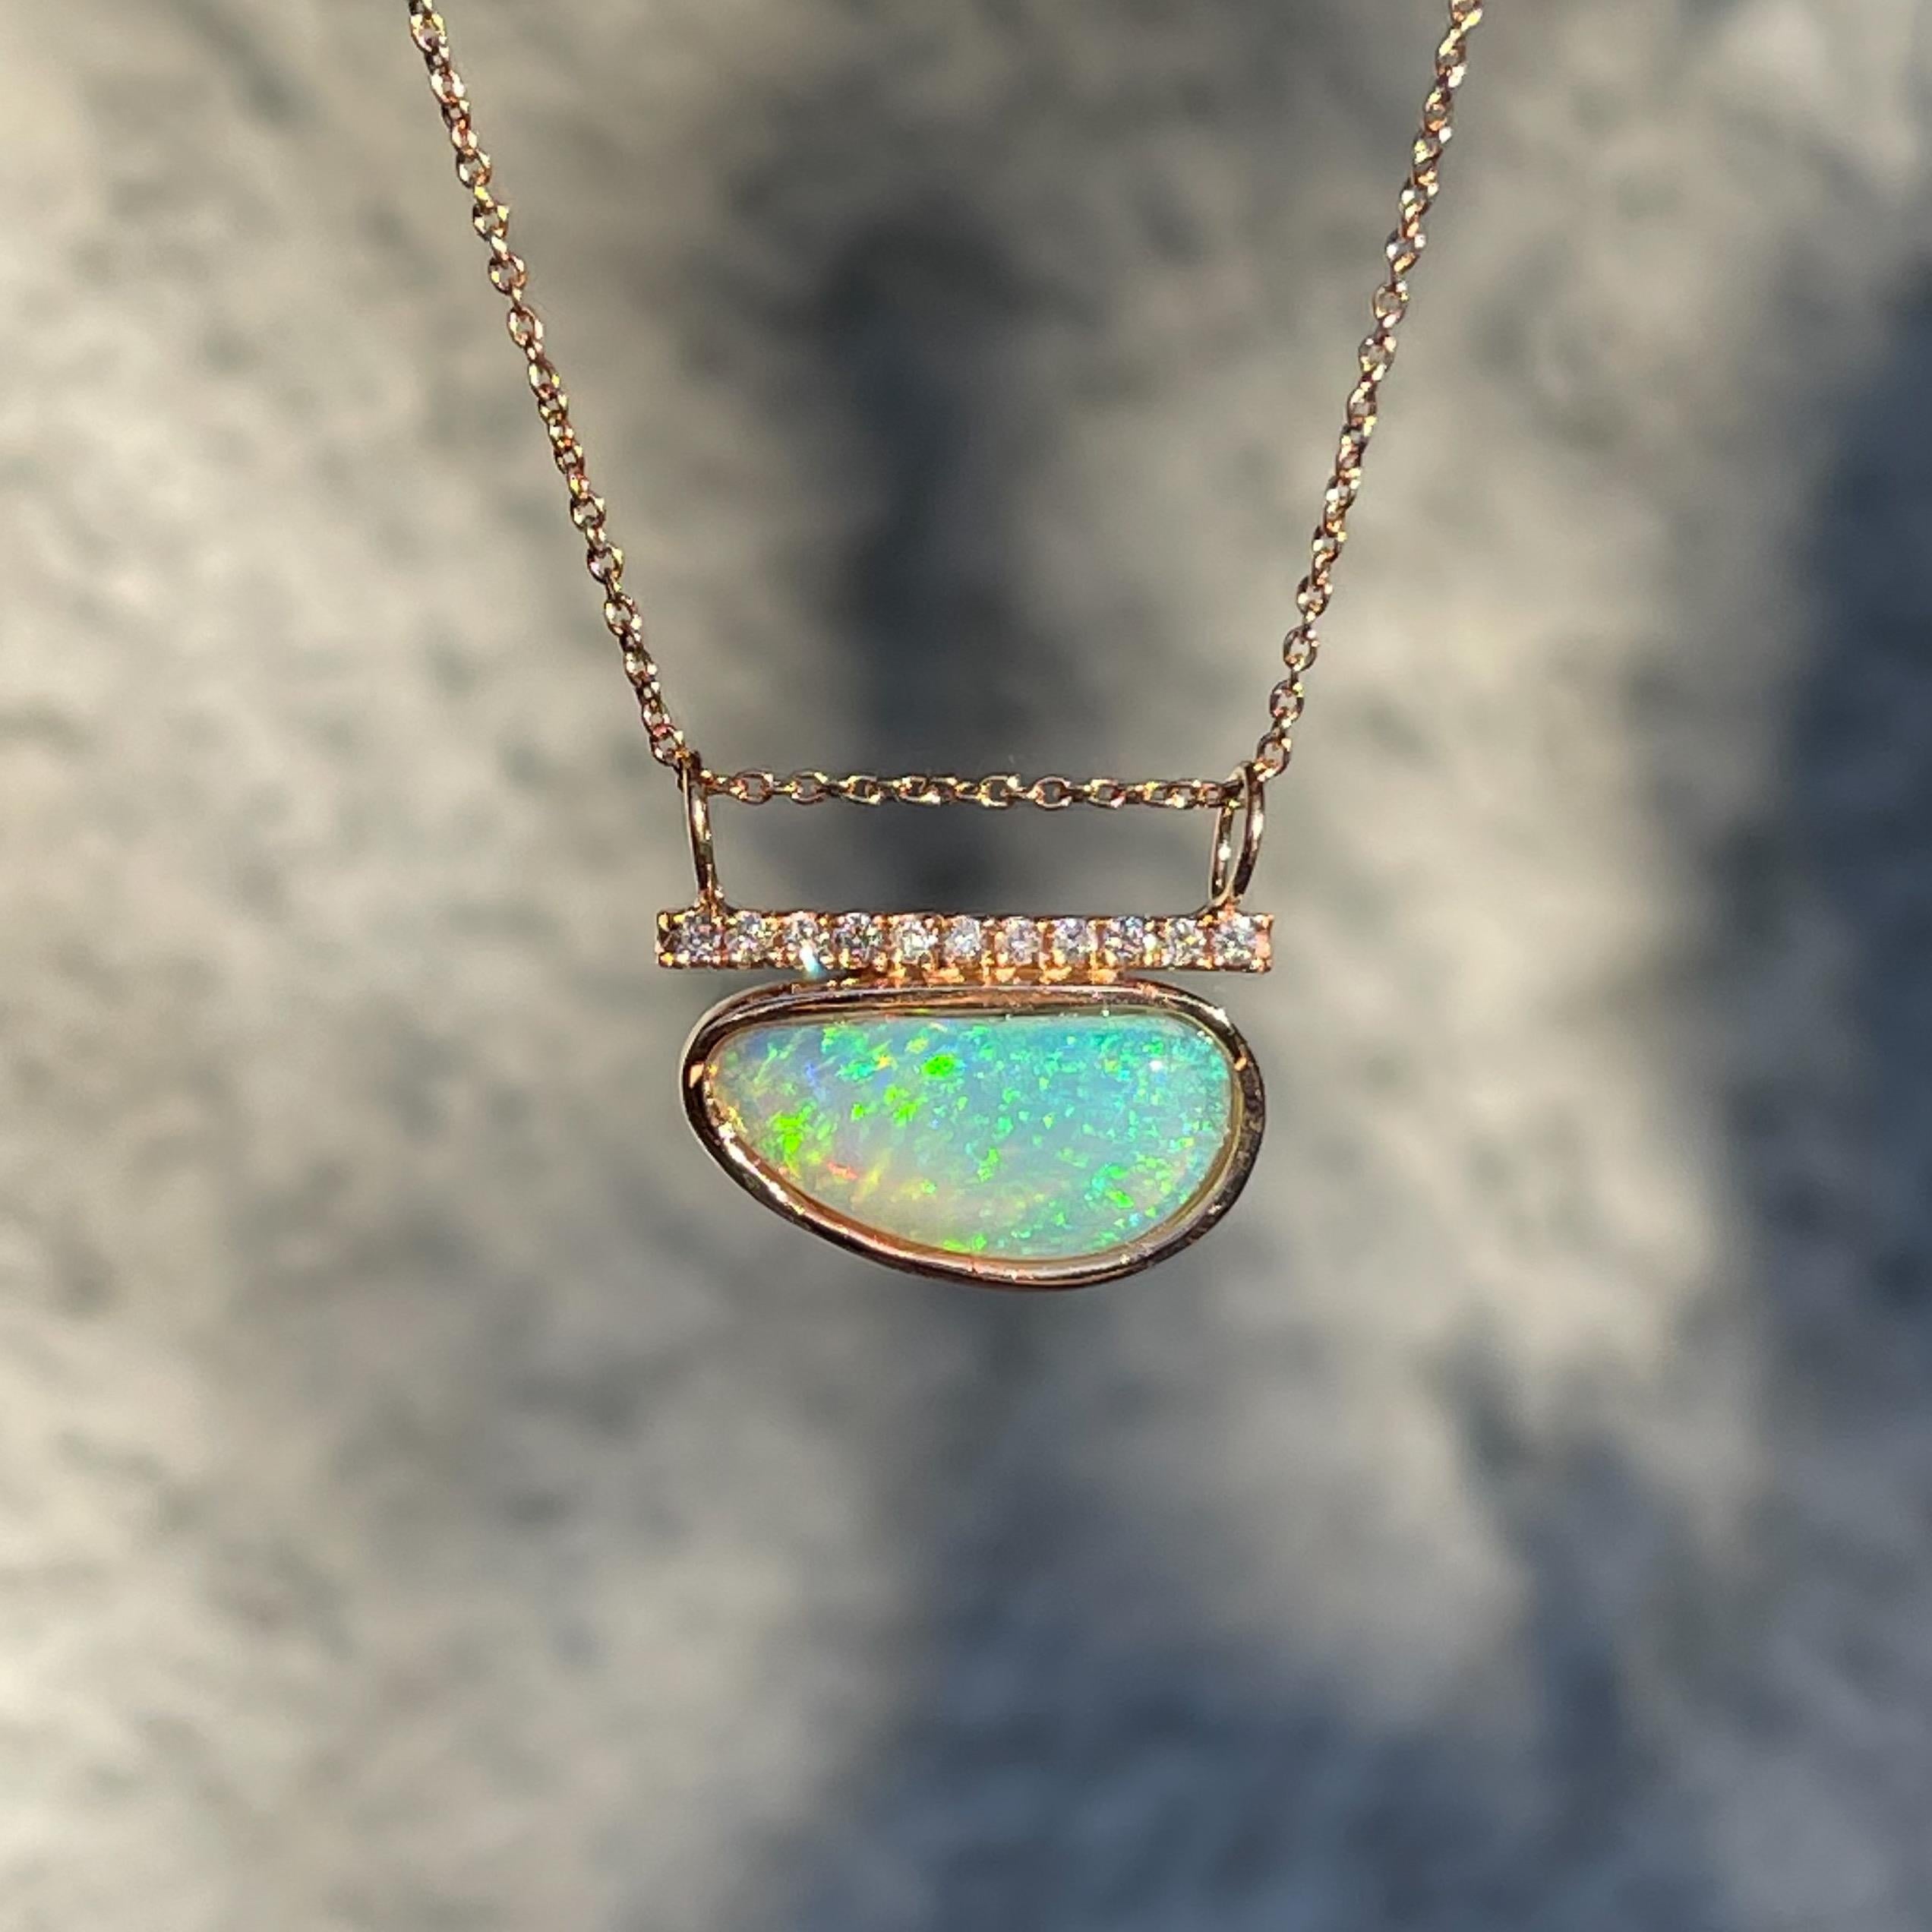 Brilliant Cut Head in the Clouds Crystal Opal Necklace No. 16 with Diamonds by NIXIN Jewelry For Sale